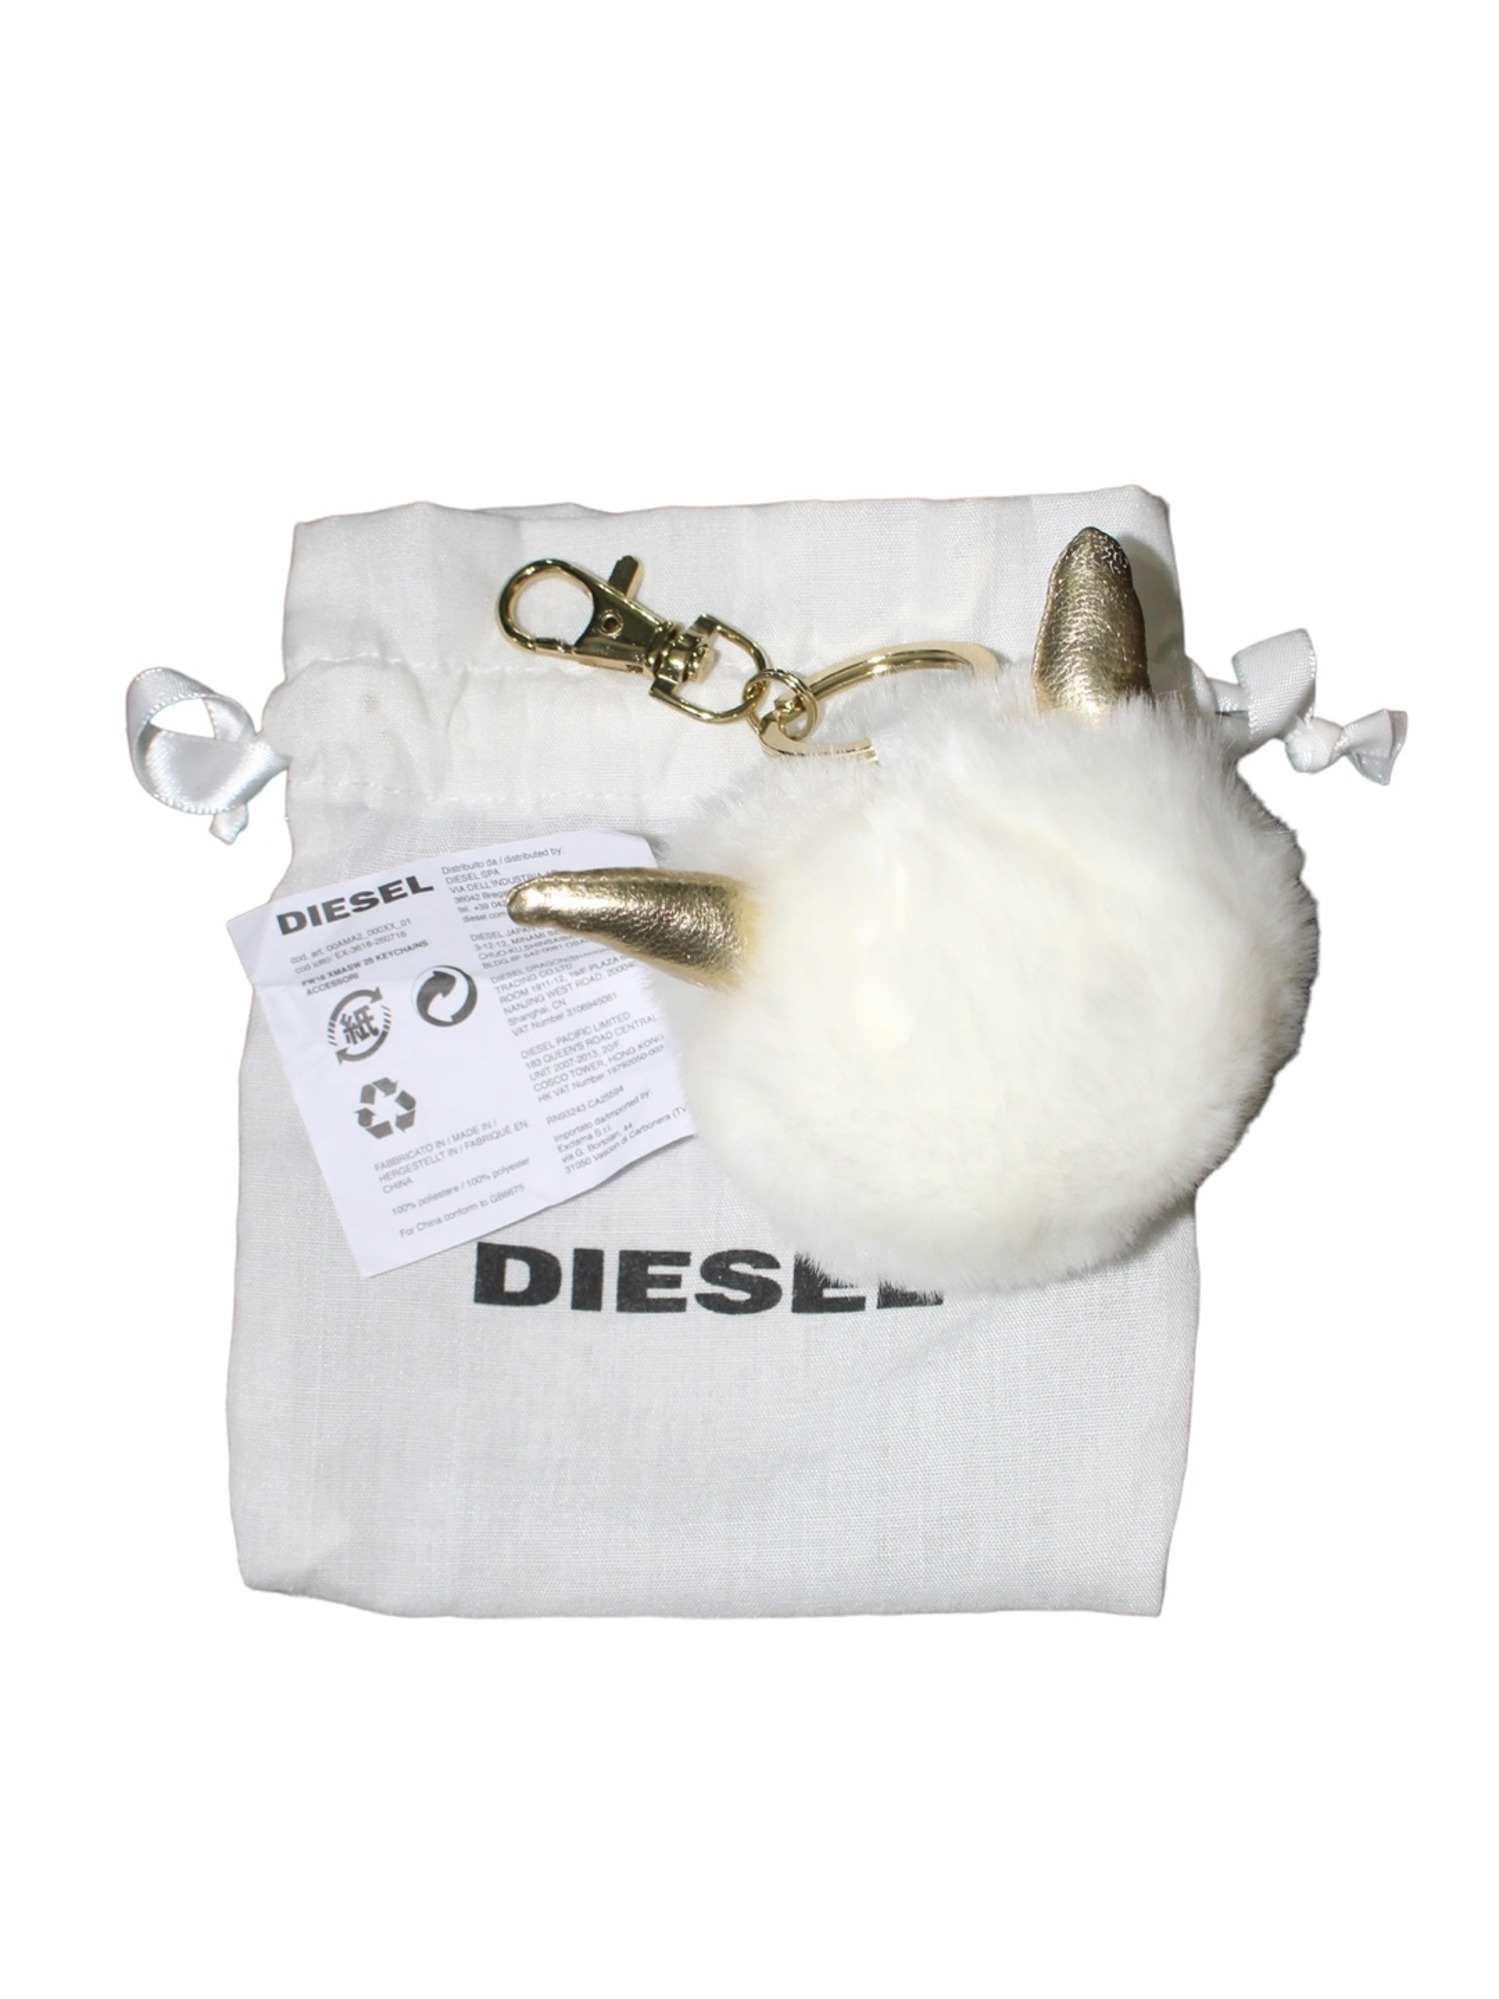 DIESEL White Furry Character Key Ring